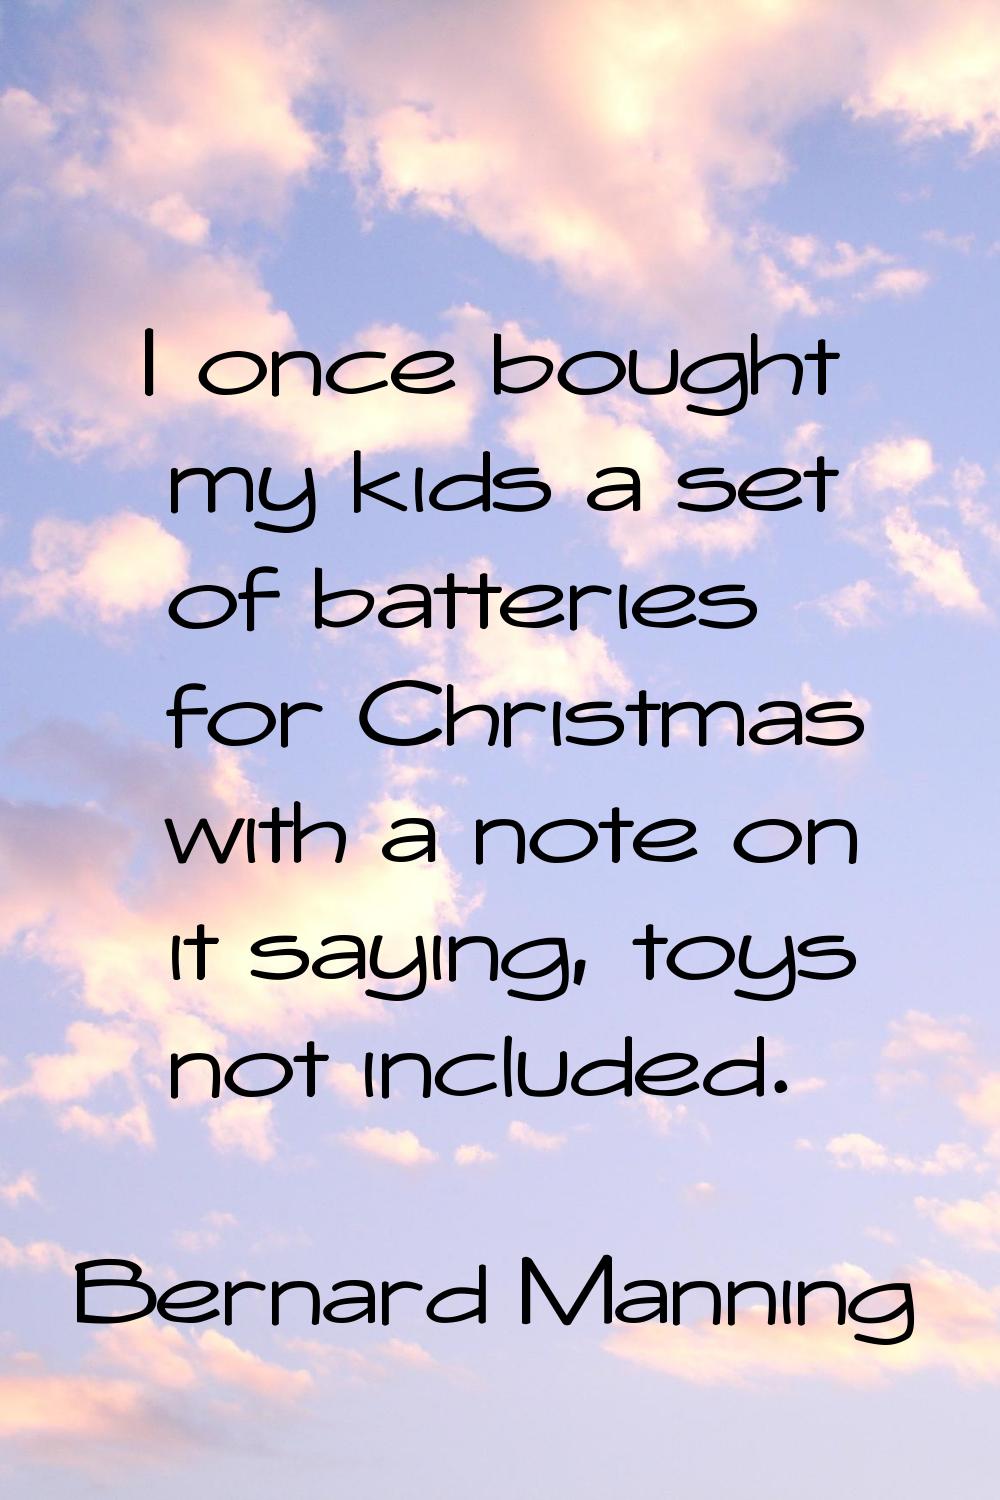 I once bought my kids a set of batteries for Christmas with a note on it saying, toys not included.